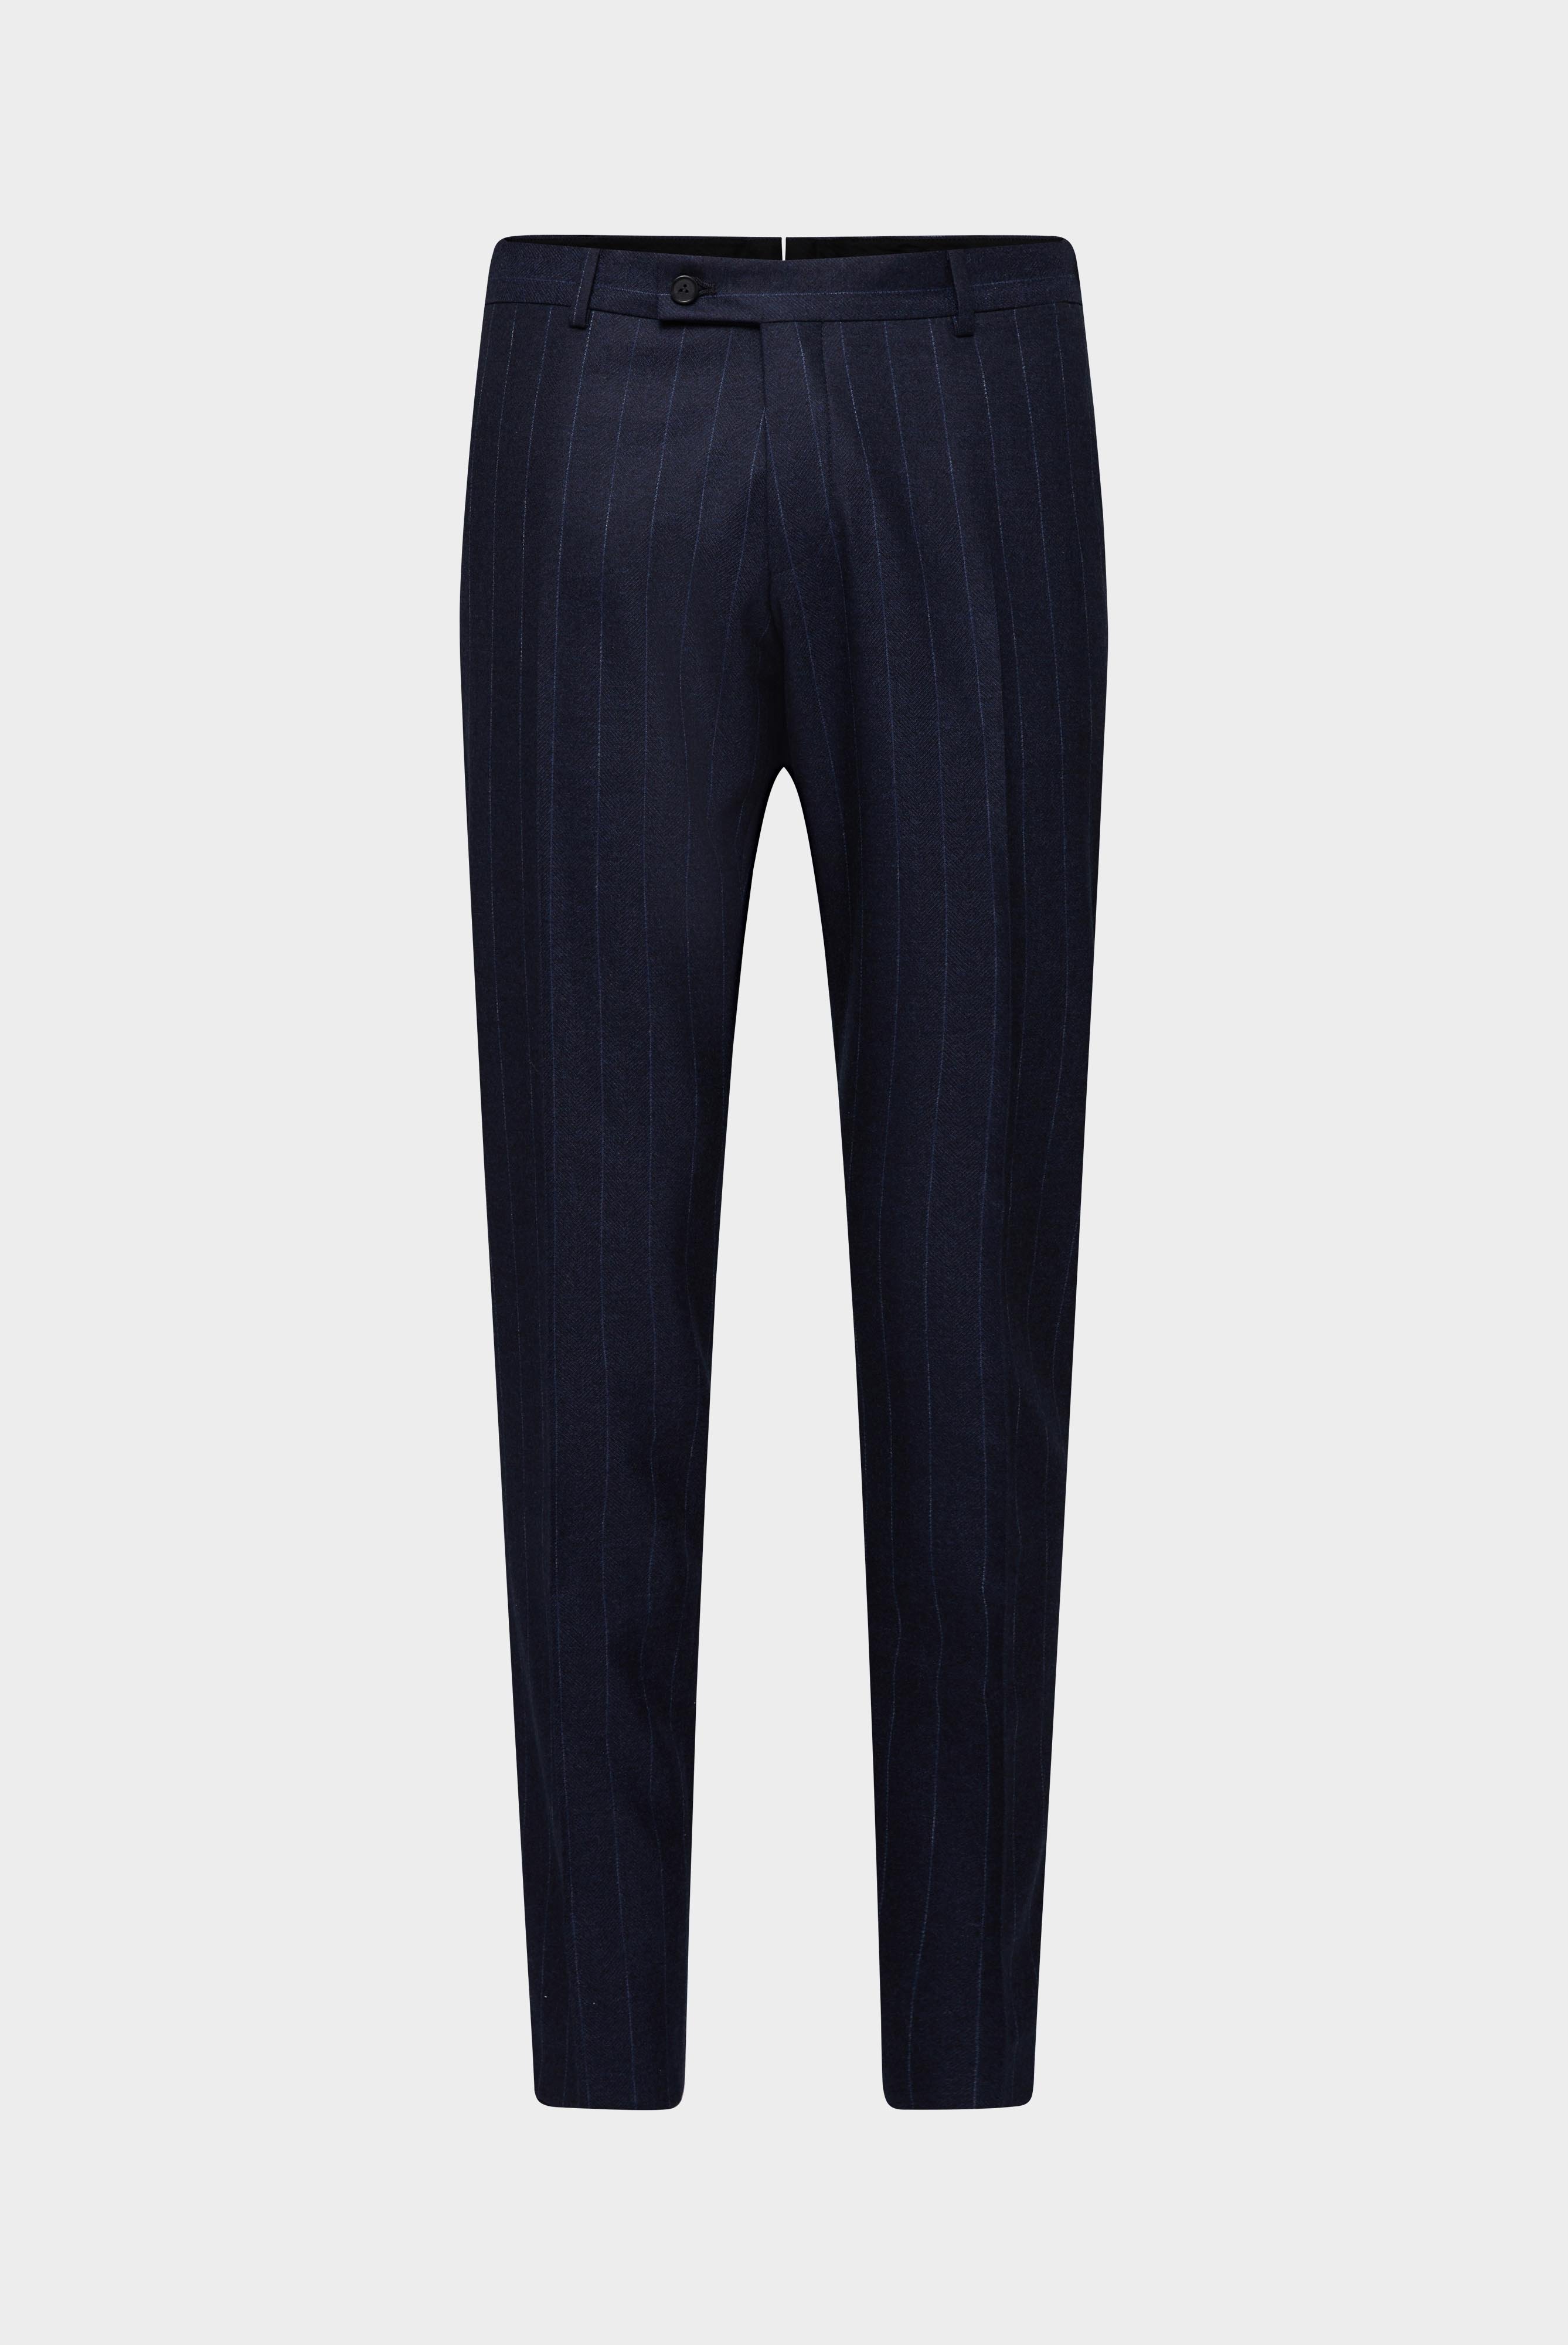 Jeans & Trousers+Wool-Flanell Trousers Slim Fit+20.7854.16.H01585.790.46